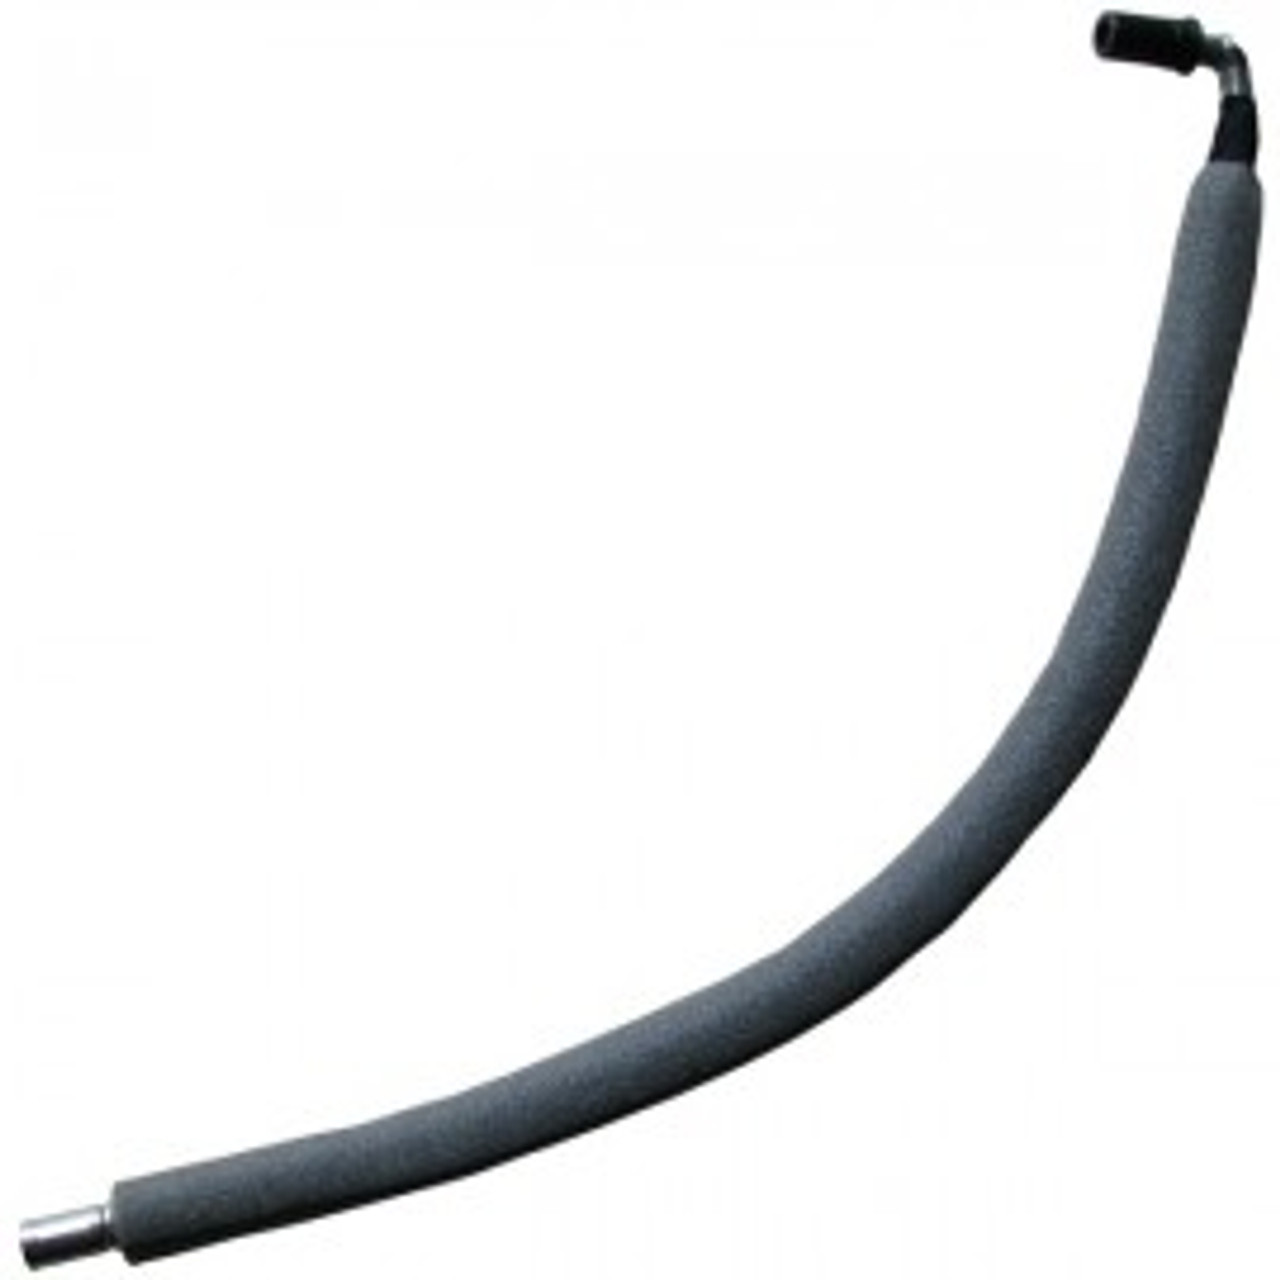 '03-'06 TJ Antenna Cable Extension